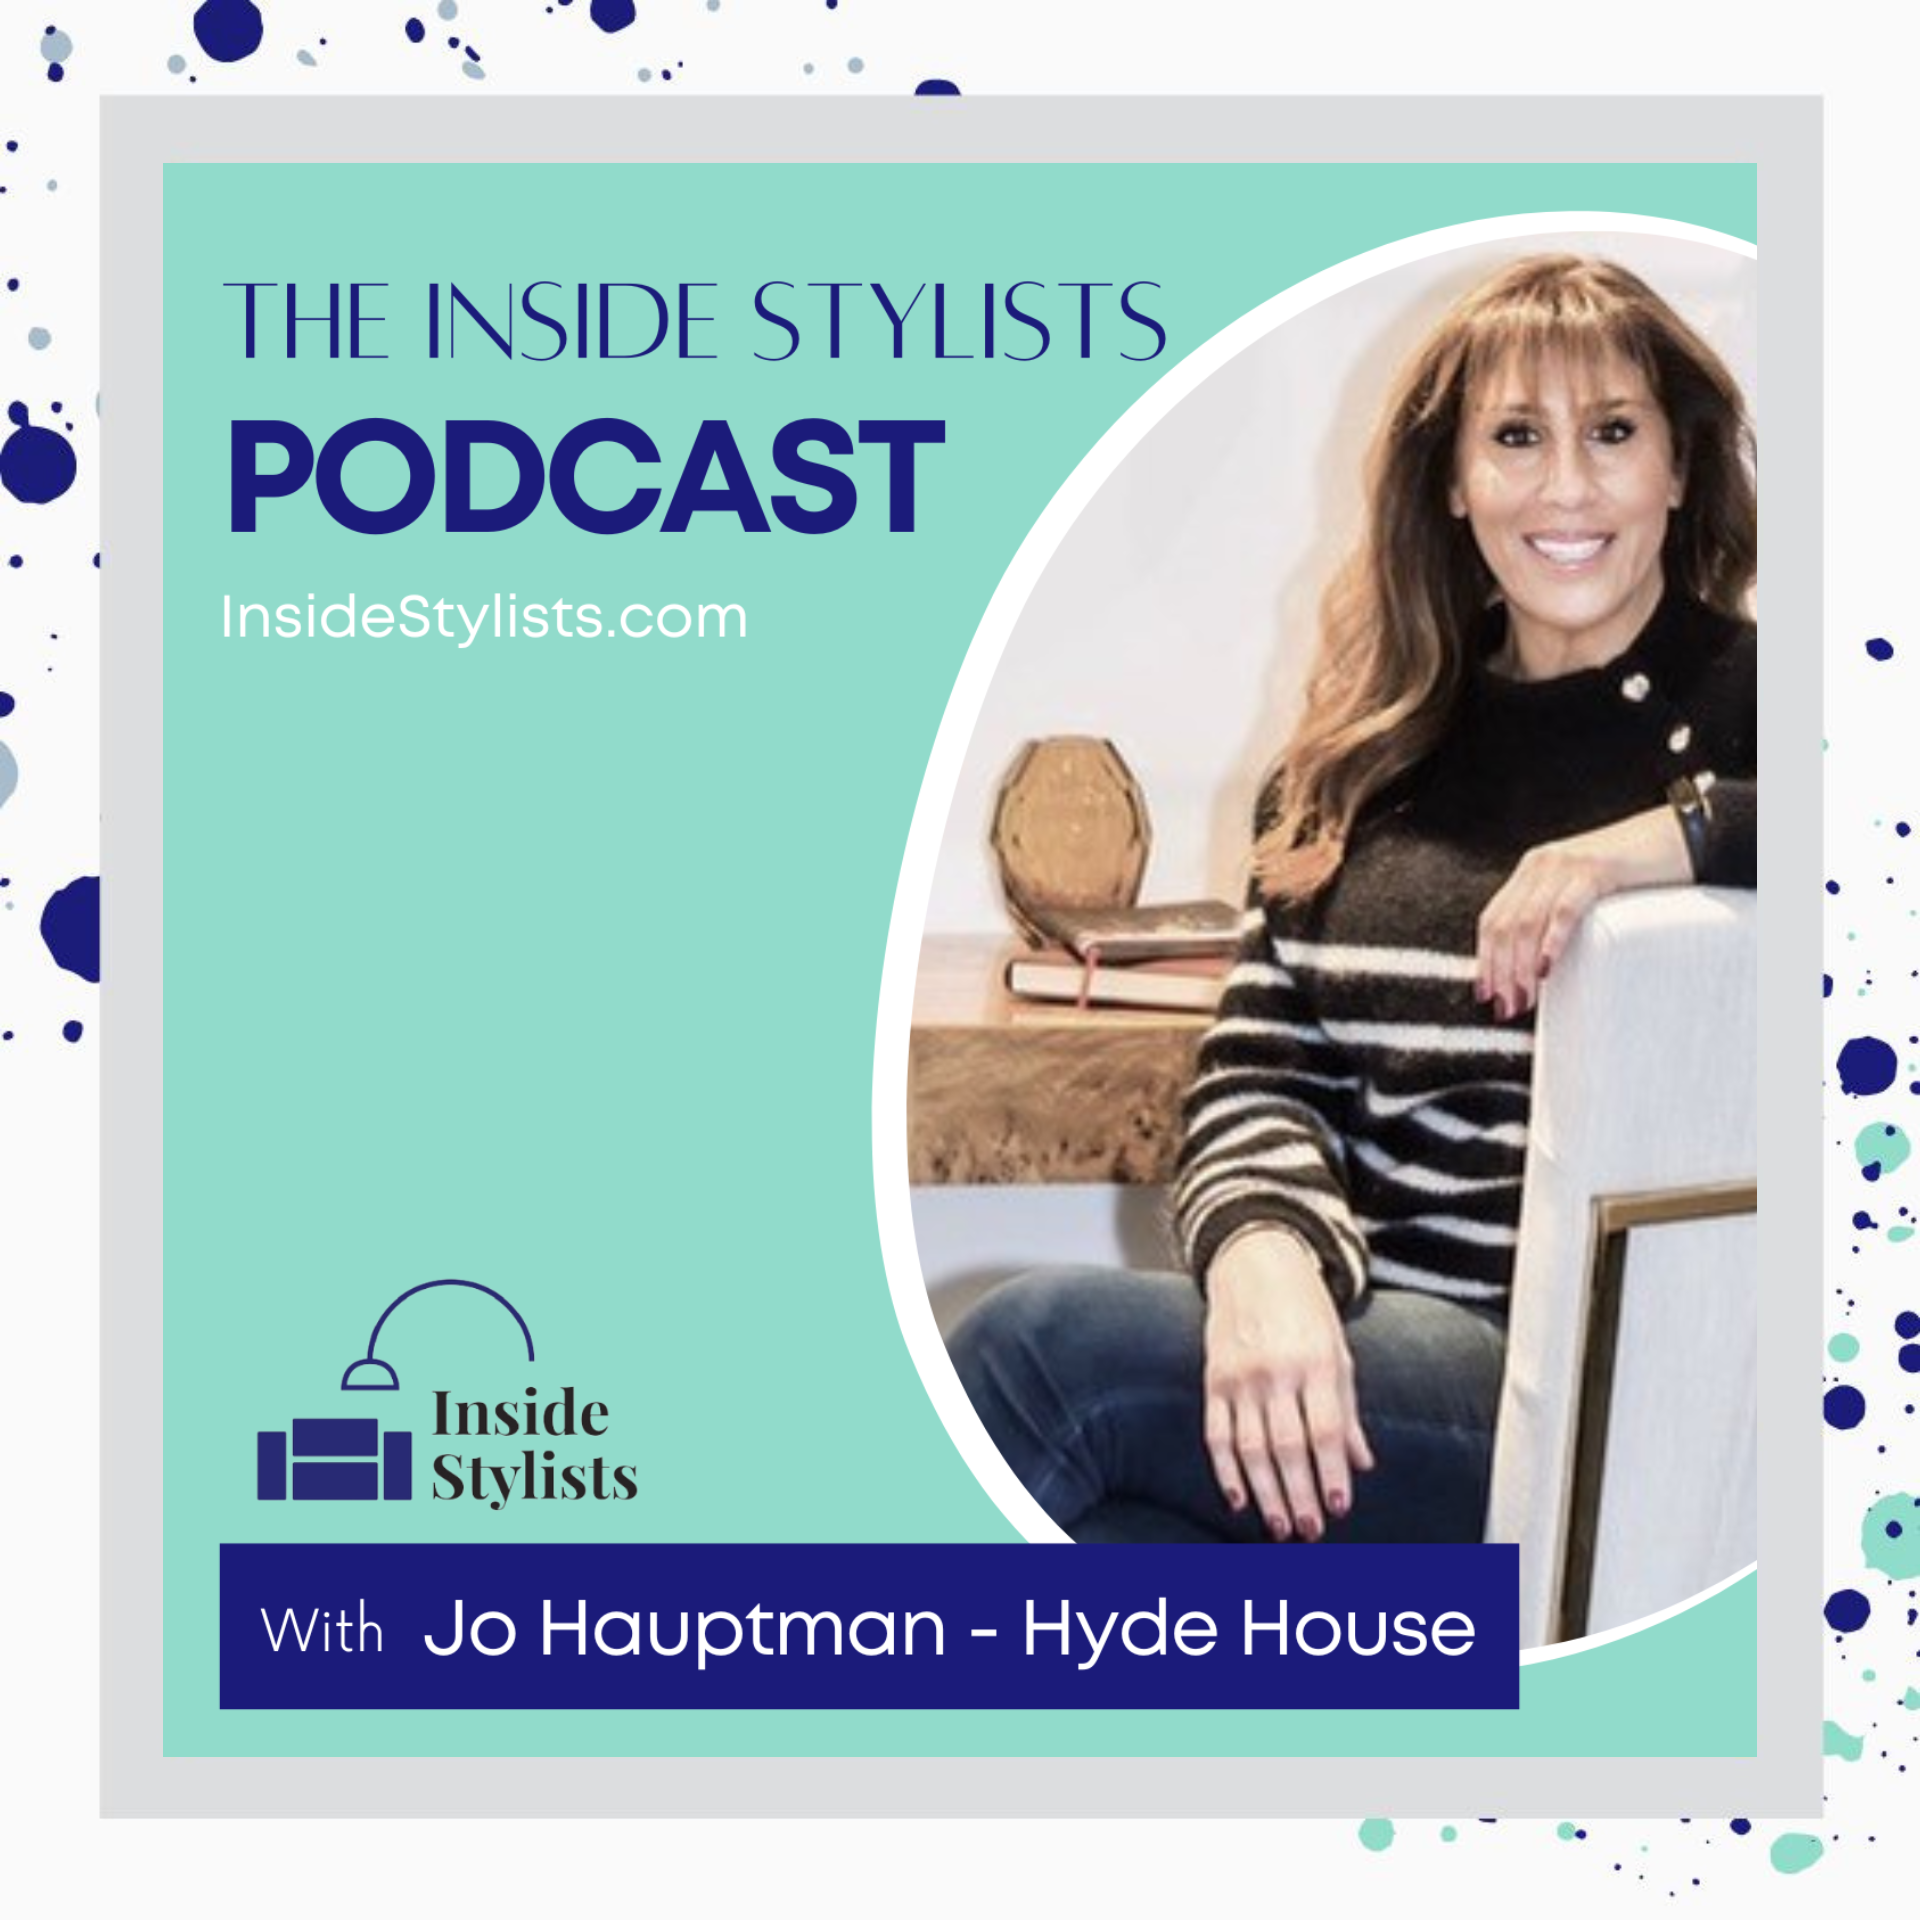 Jo Hauptman, Guest from Hyde House, featured on Inside Stylists Podcast